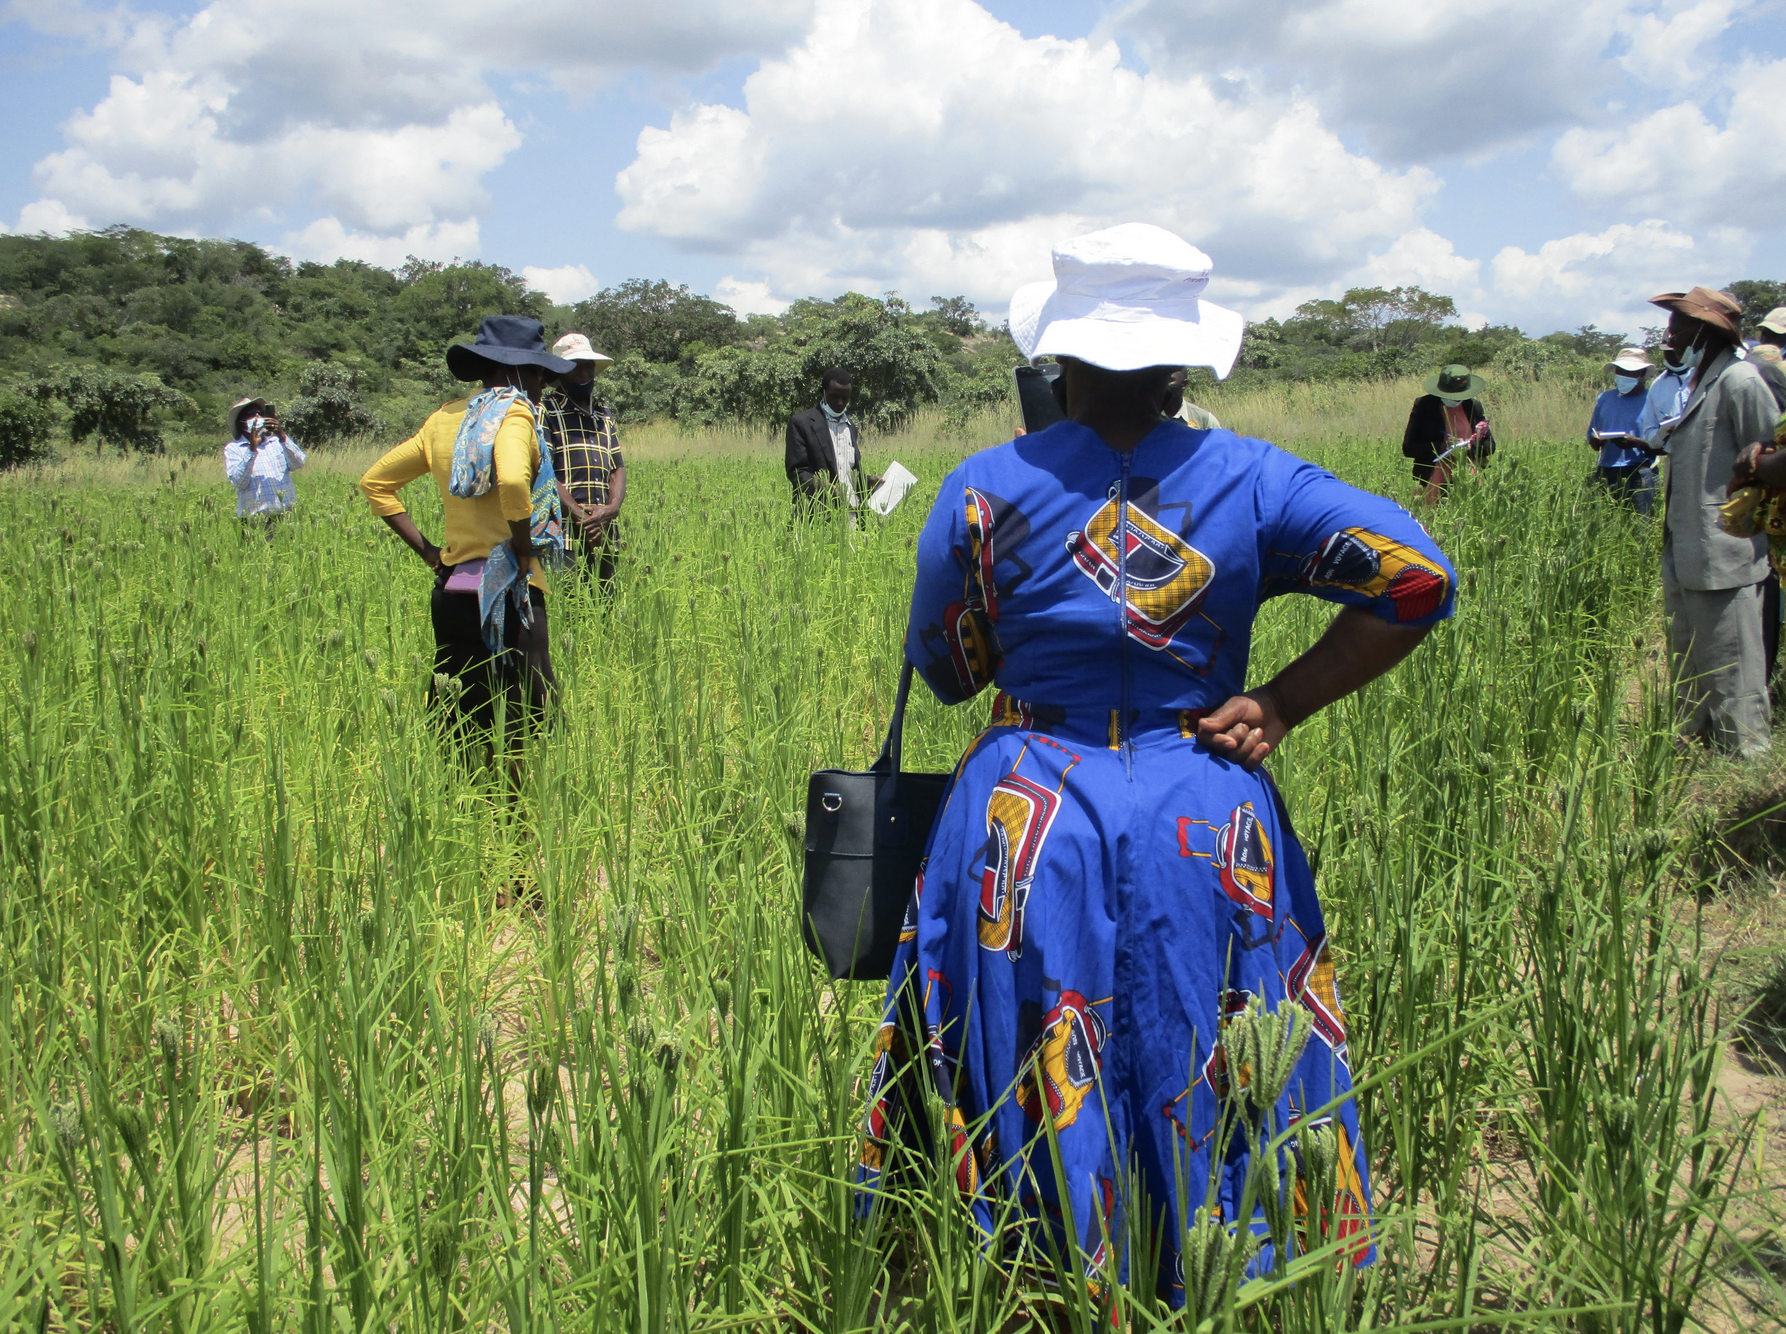 A large finger millet field in Gutu district, Masvingo province, southern Zimbabwe. The grass is green and a couple of farmers are inspecting the field. A Black woman wearing a white hat and a deep blue dress is facing her back to the camera. She is also holding a black handbag Photo by Collins Chirinda, courtesy of PELUM Zimbabwe.